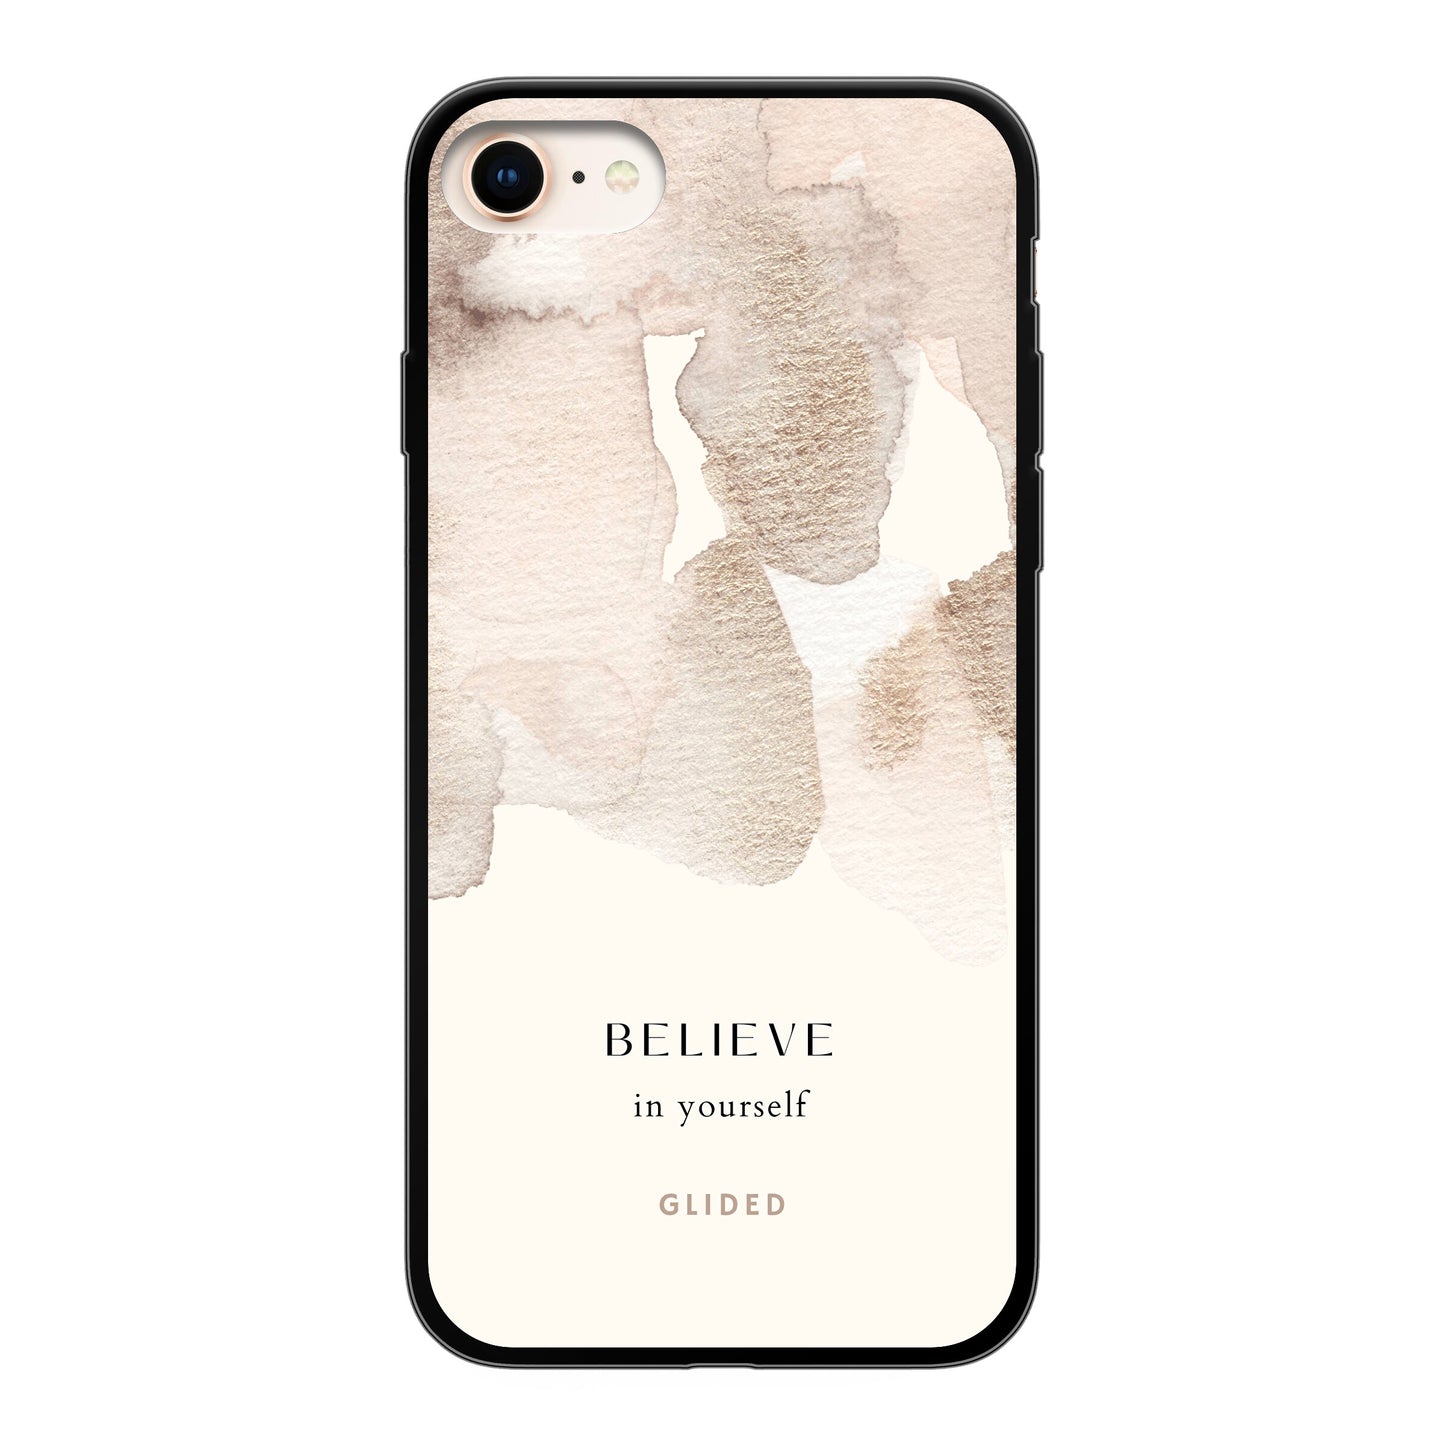 Believe in yourself - iPhone 7 Handyhülle Soft case